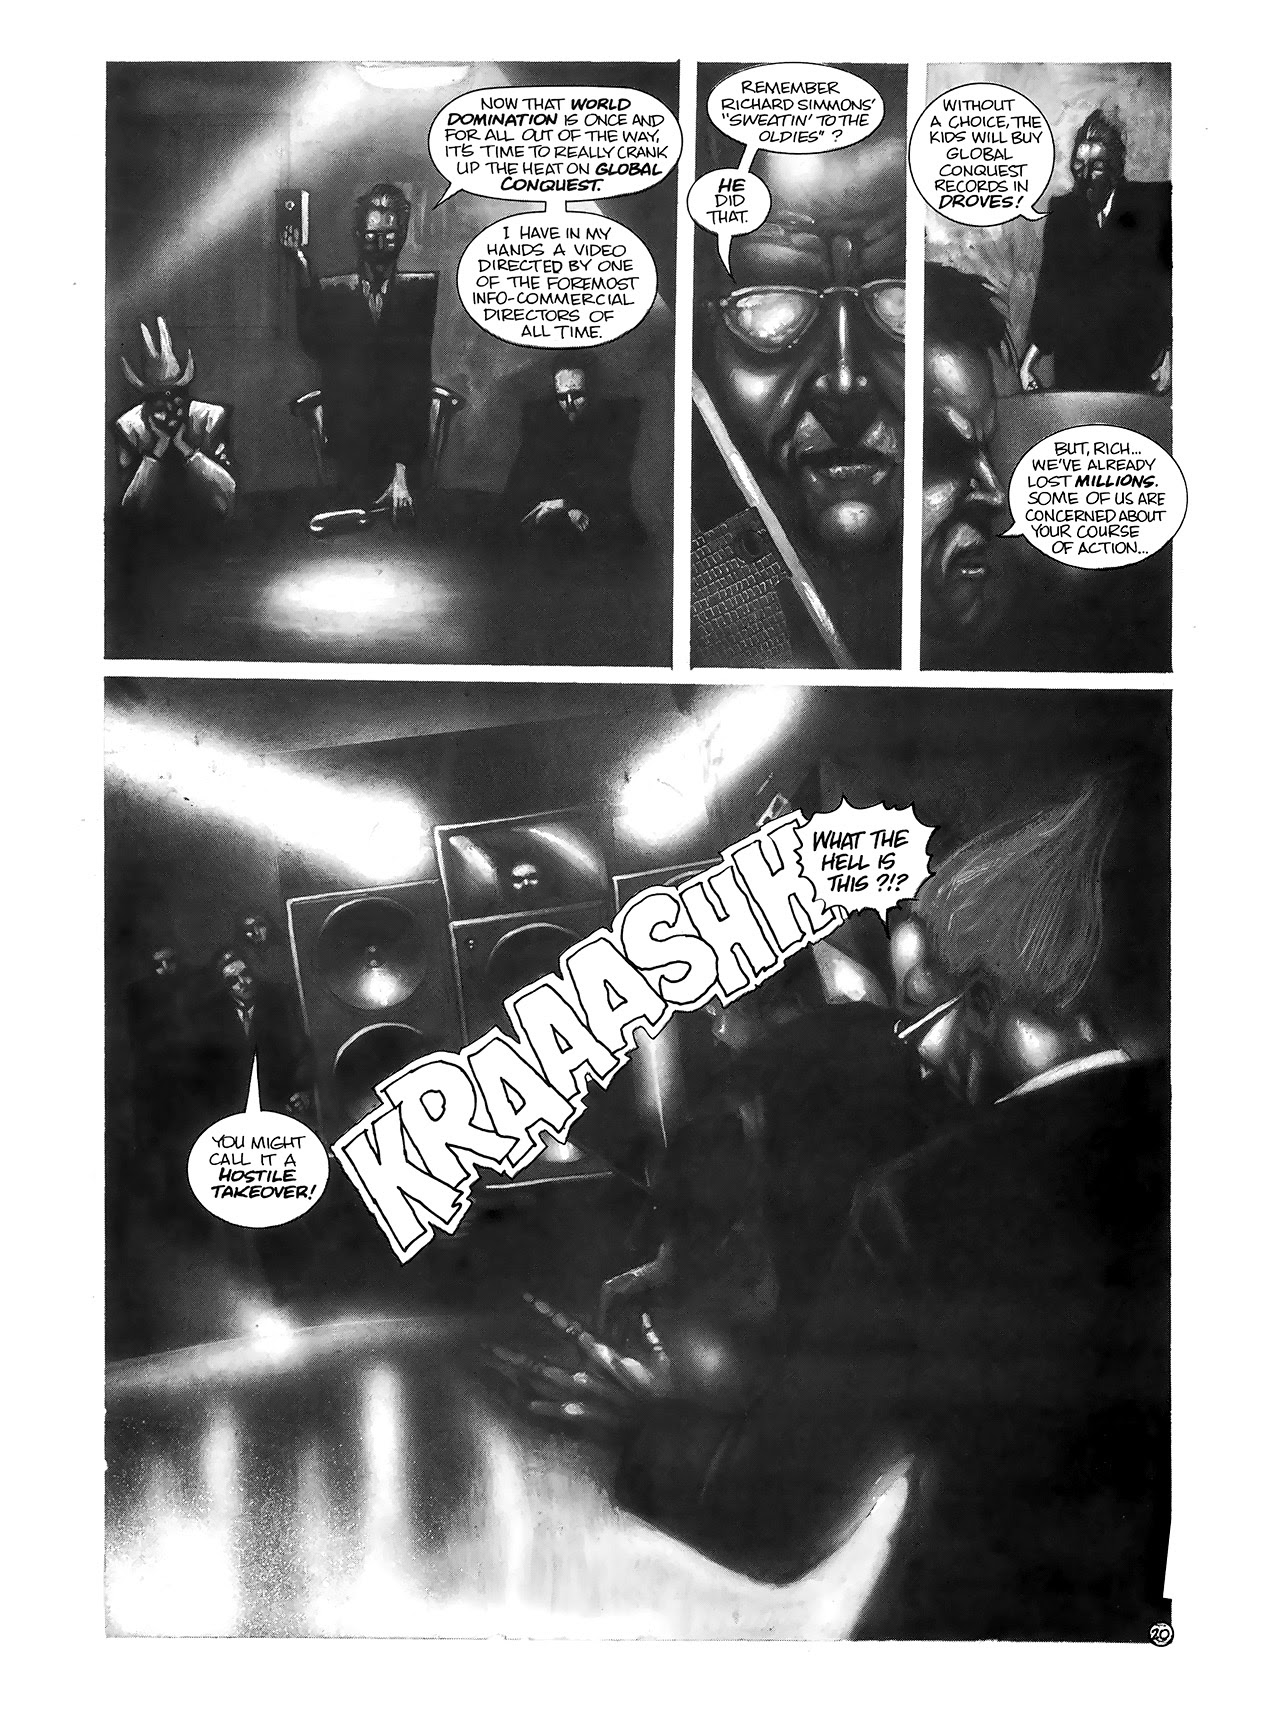 Read online World Domination comic -  Issue # Full - 22